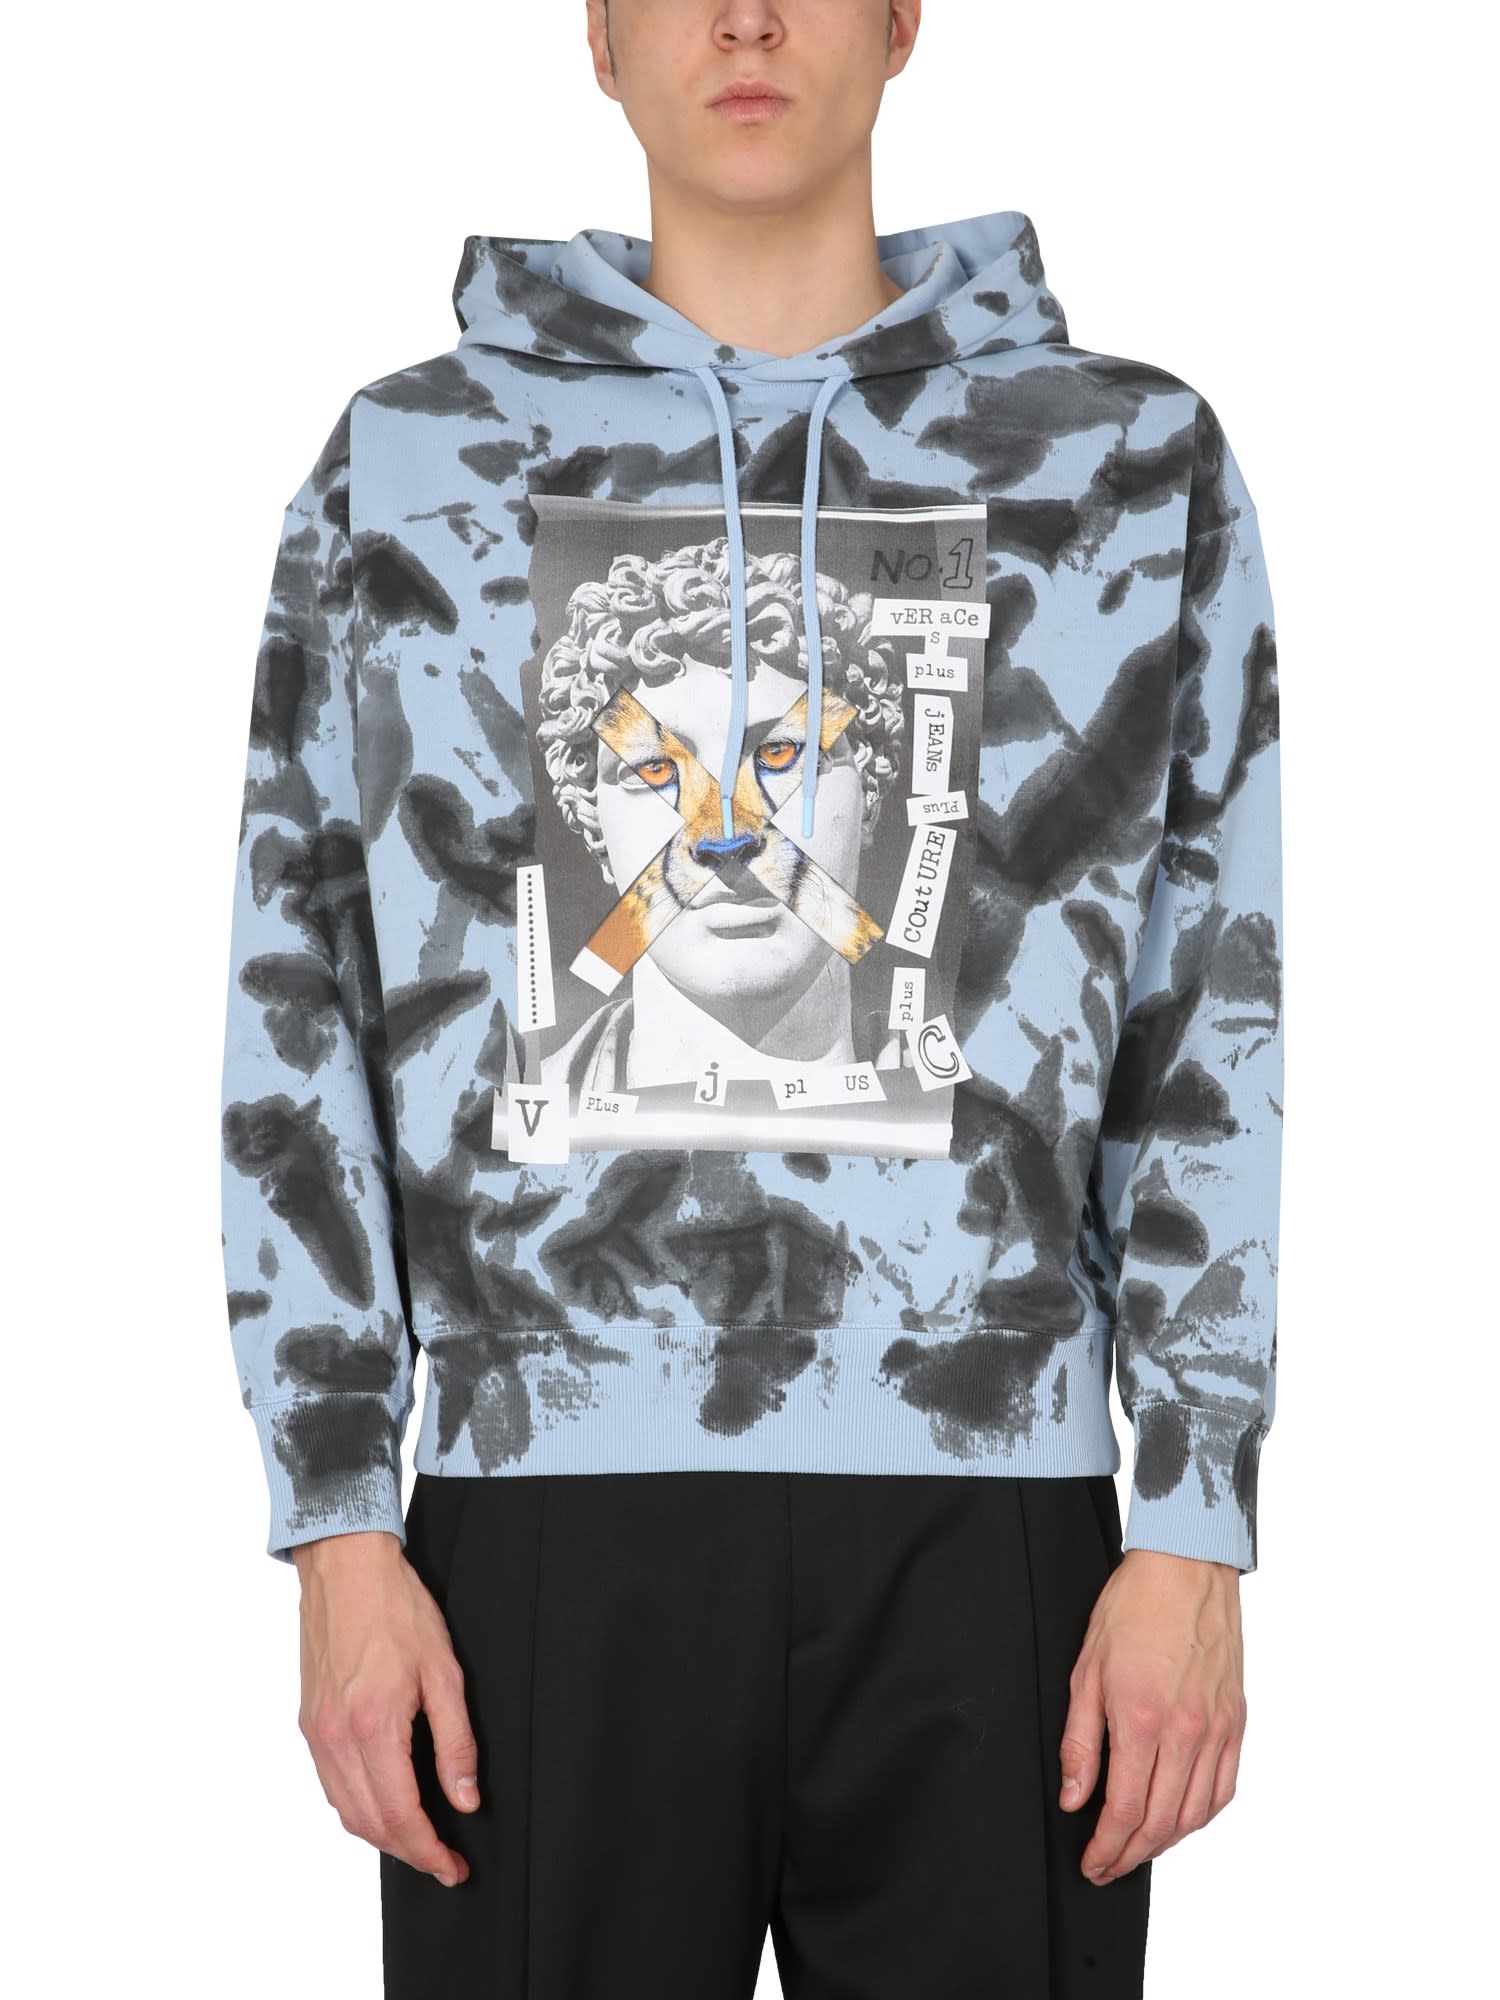 VERSACE JEANS COUTURE HEY REILLY CAPSULE COLLECTION SWEATSHIRT,B7GWA7VE 30443O24